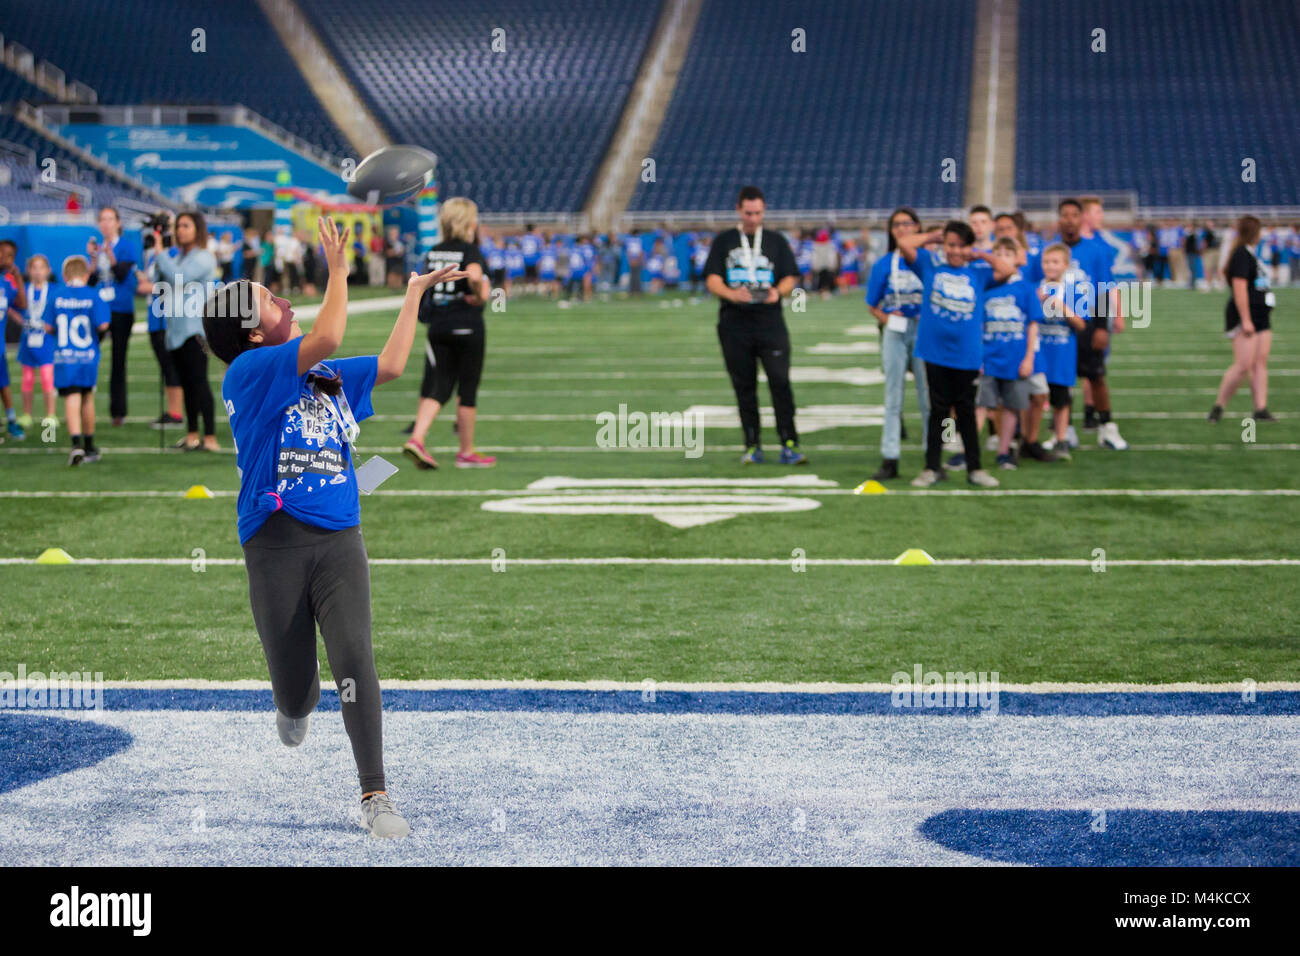 Detroit, Michigan - A girl catches a pass in the end zone as students participate in a physical activity and nutrition program at Ford Field. The prog Stock Photo